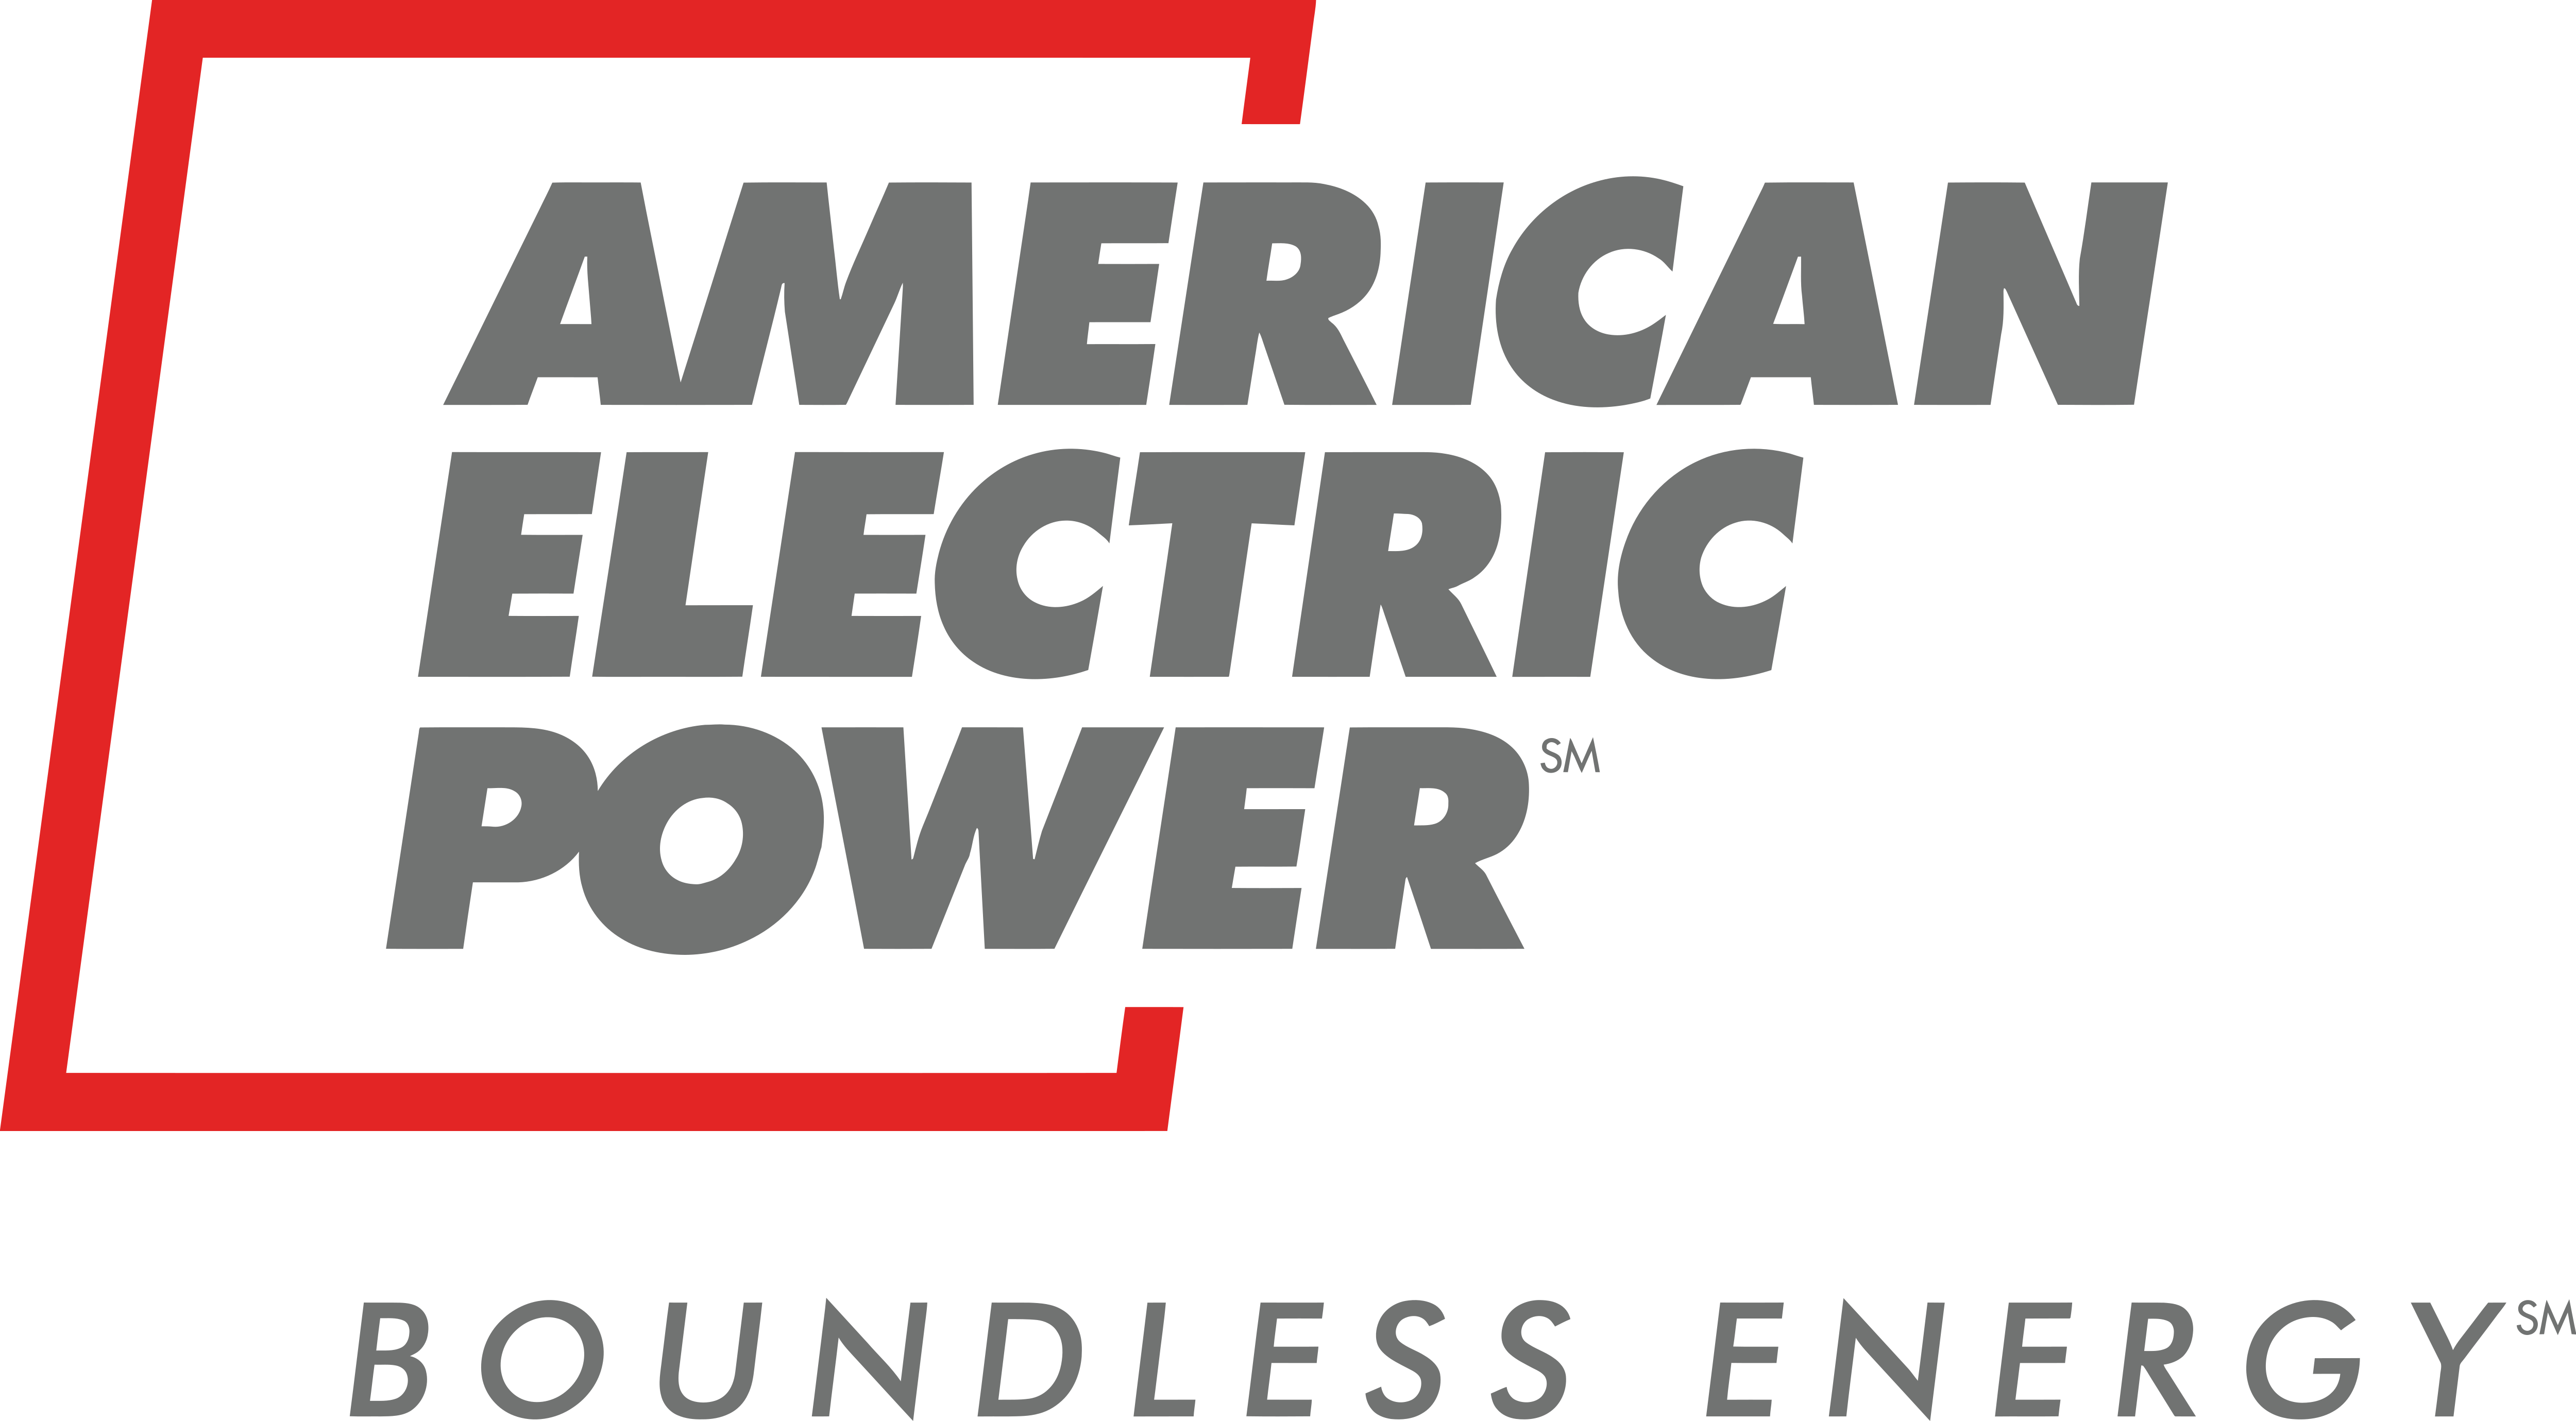 georgia-power-rebates-up-to-750-for-switching-to-electric-heat-pump